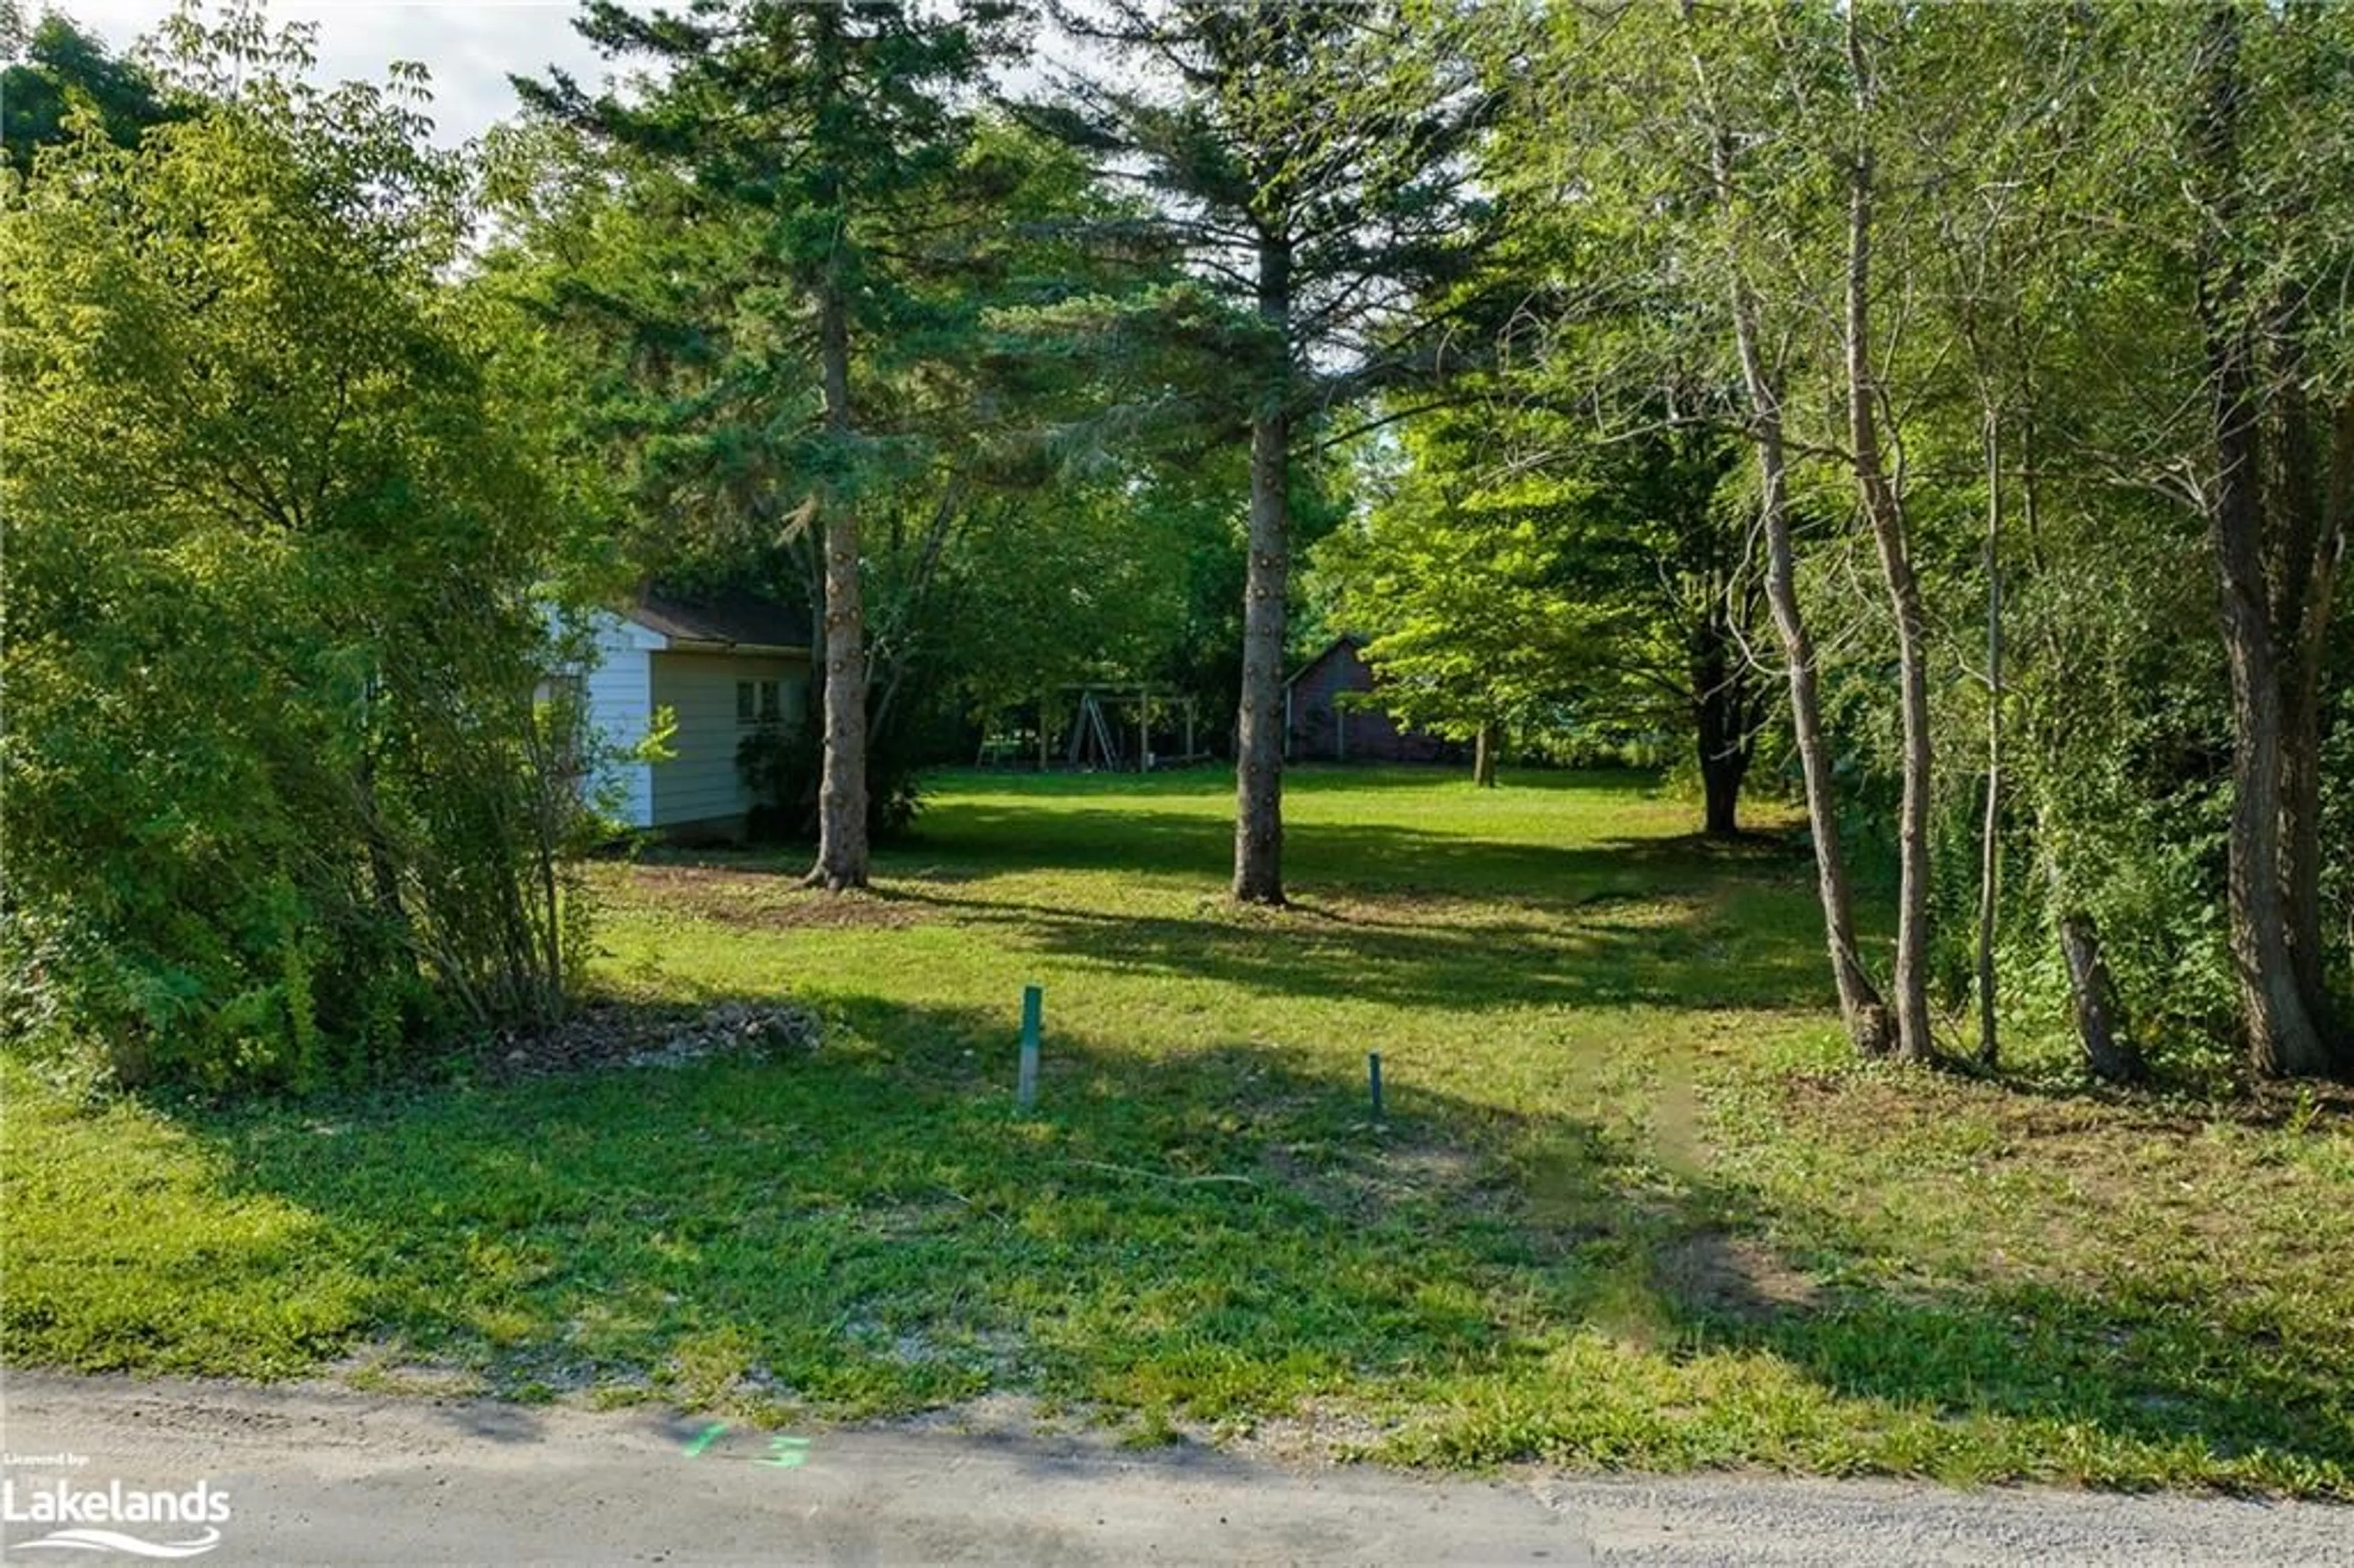 Street view for PART LOT 8, Nelson St, Creemore Ontario L0M 1G0